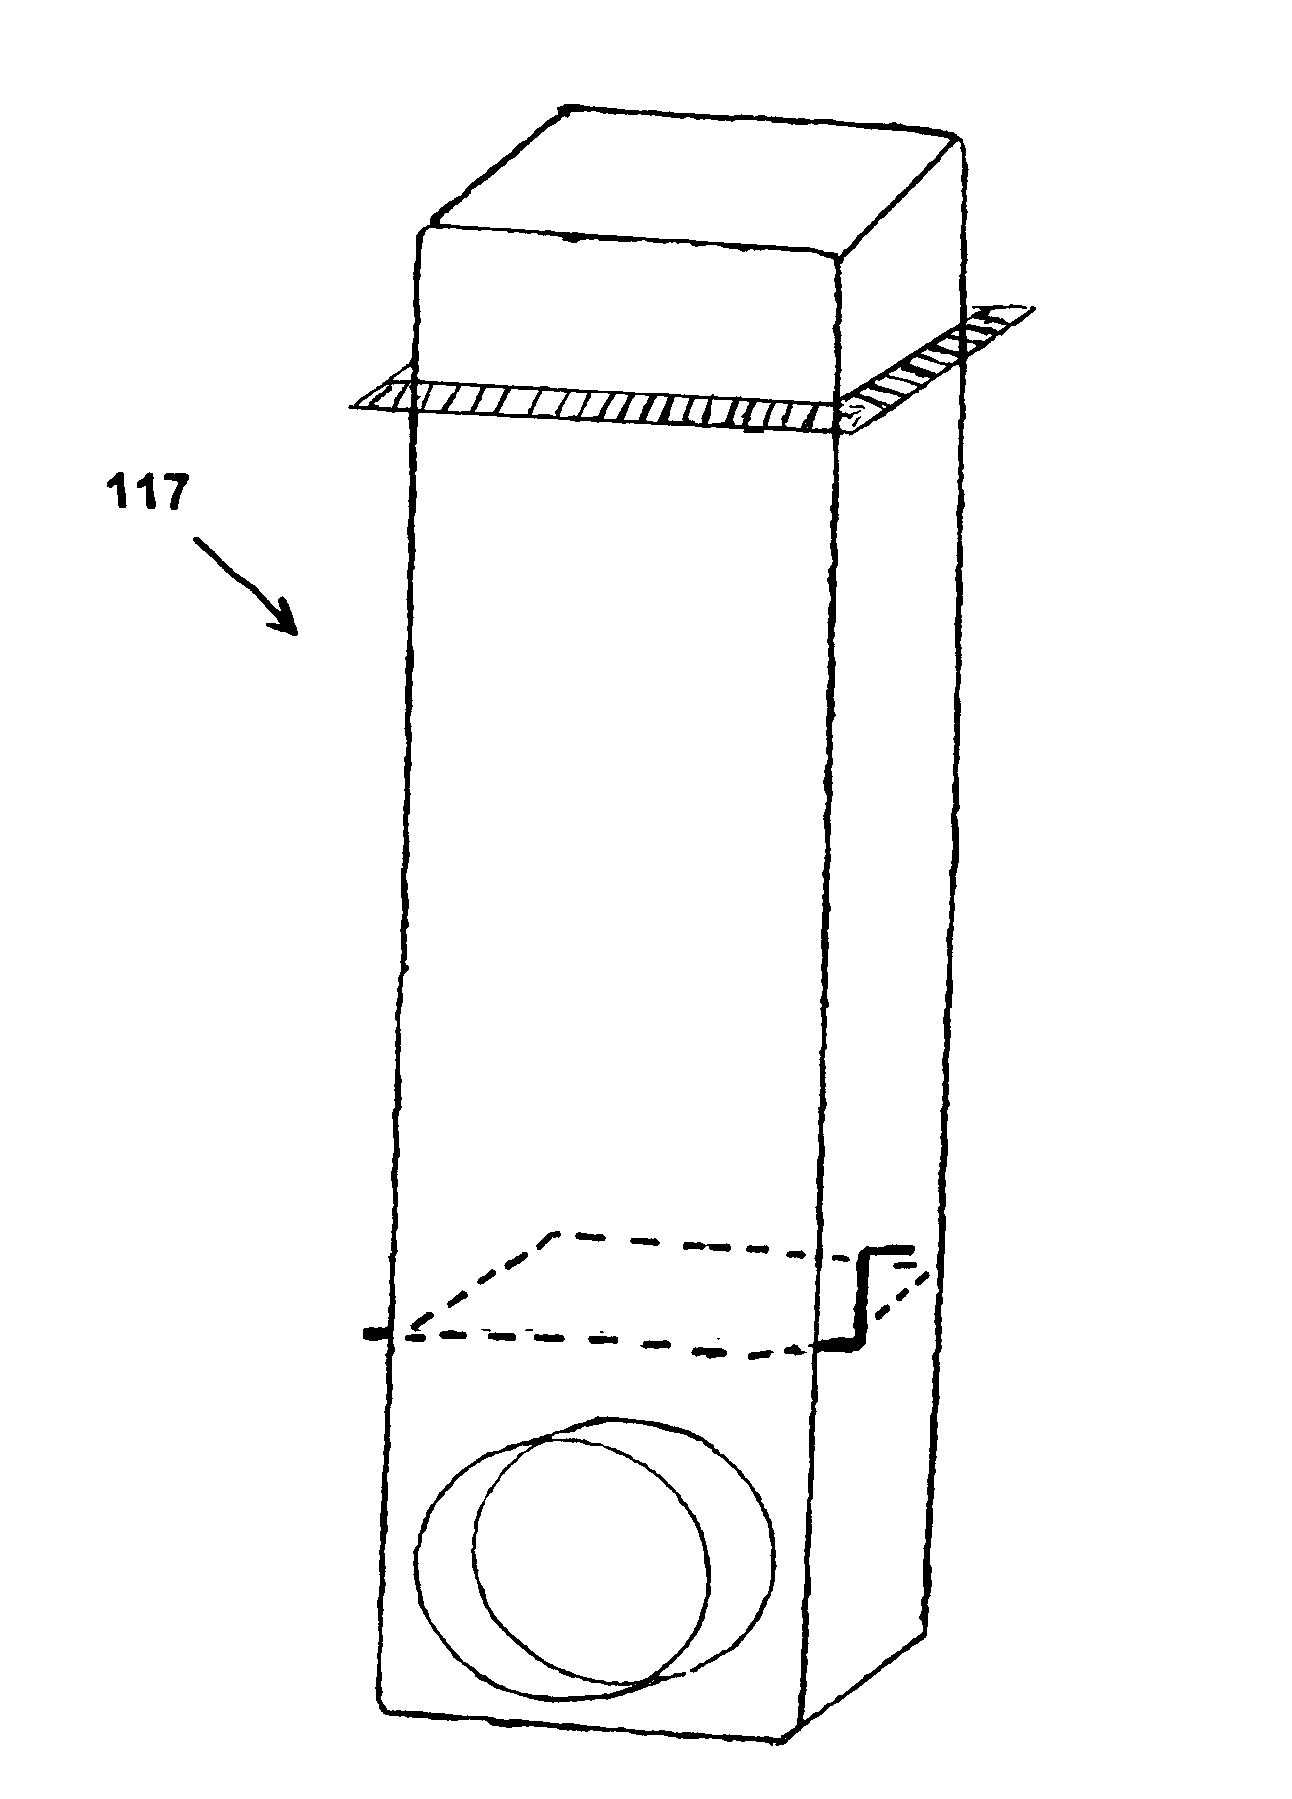 Method of reducing silicosis caused by inhalation of silica-containing proppant, such as silica sand and resin-coated sand, and apparatus therefor